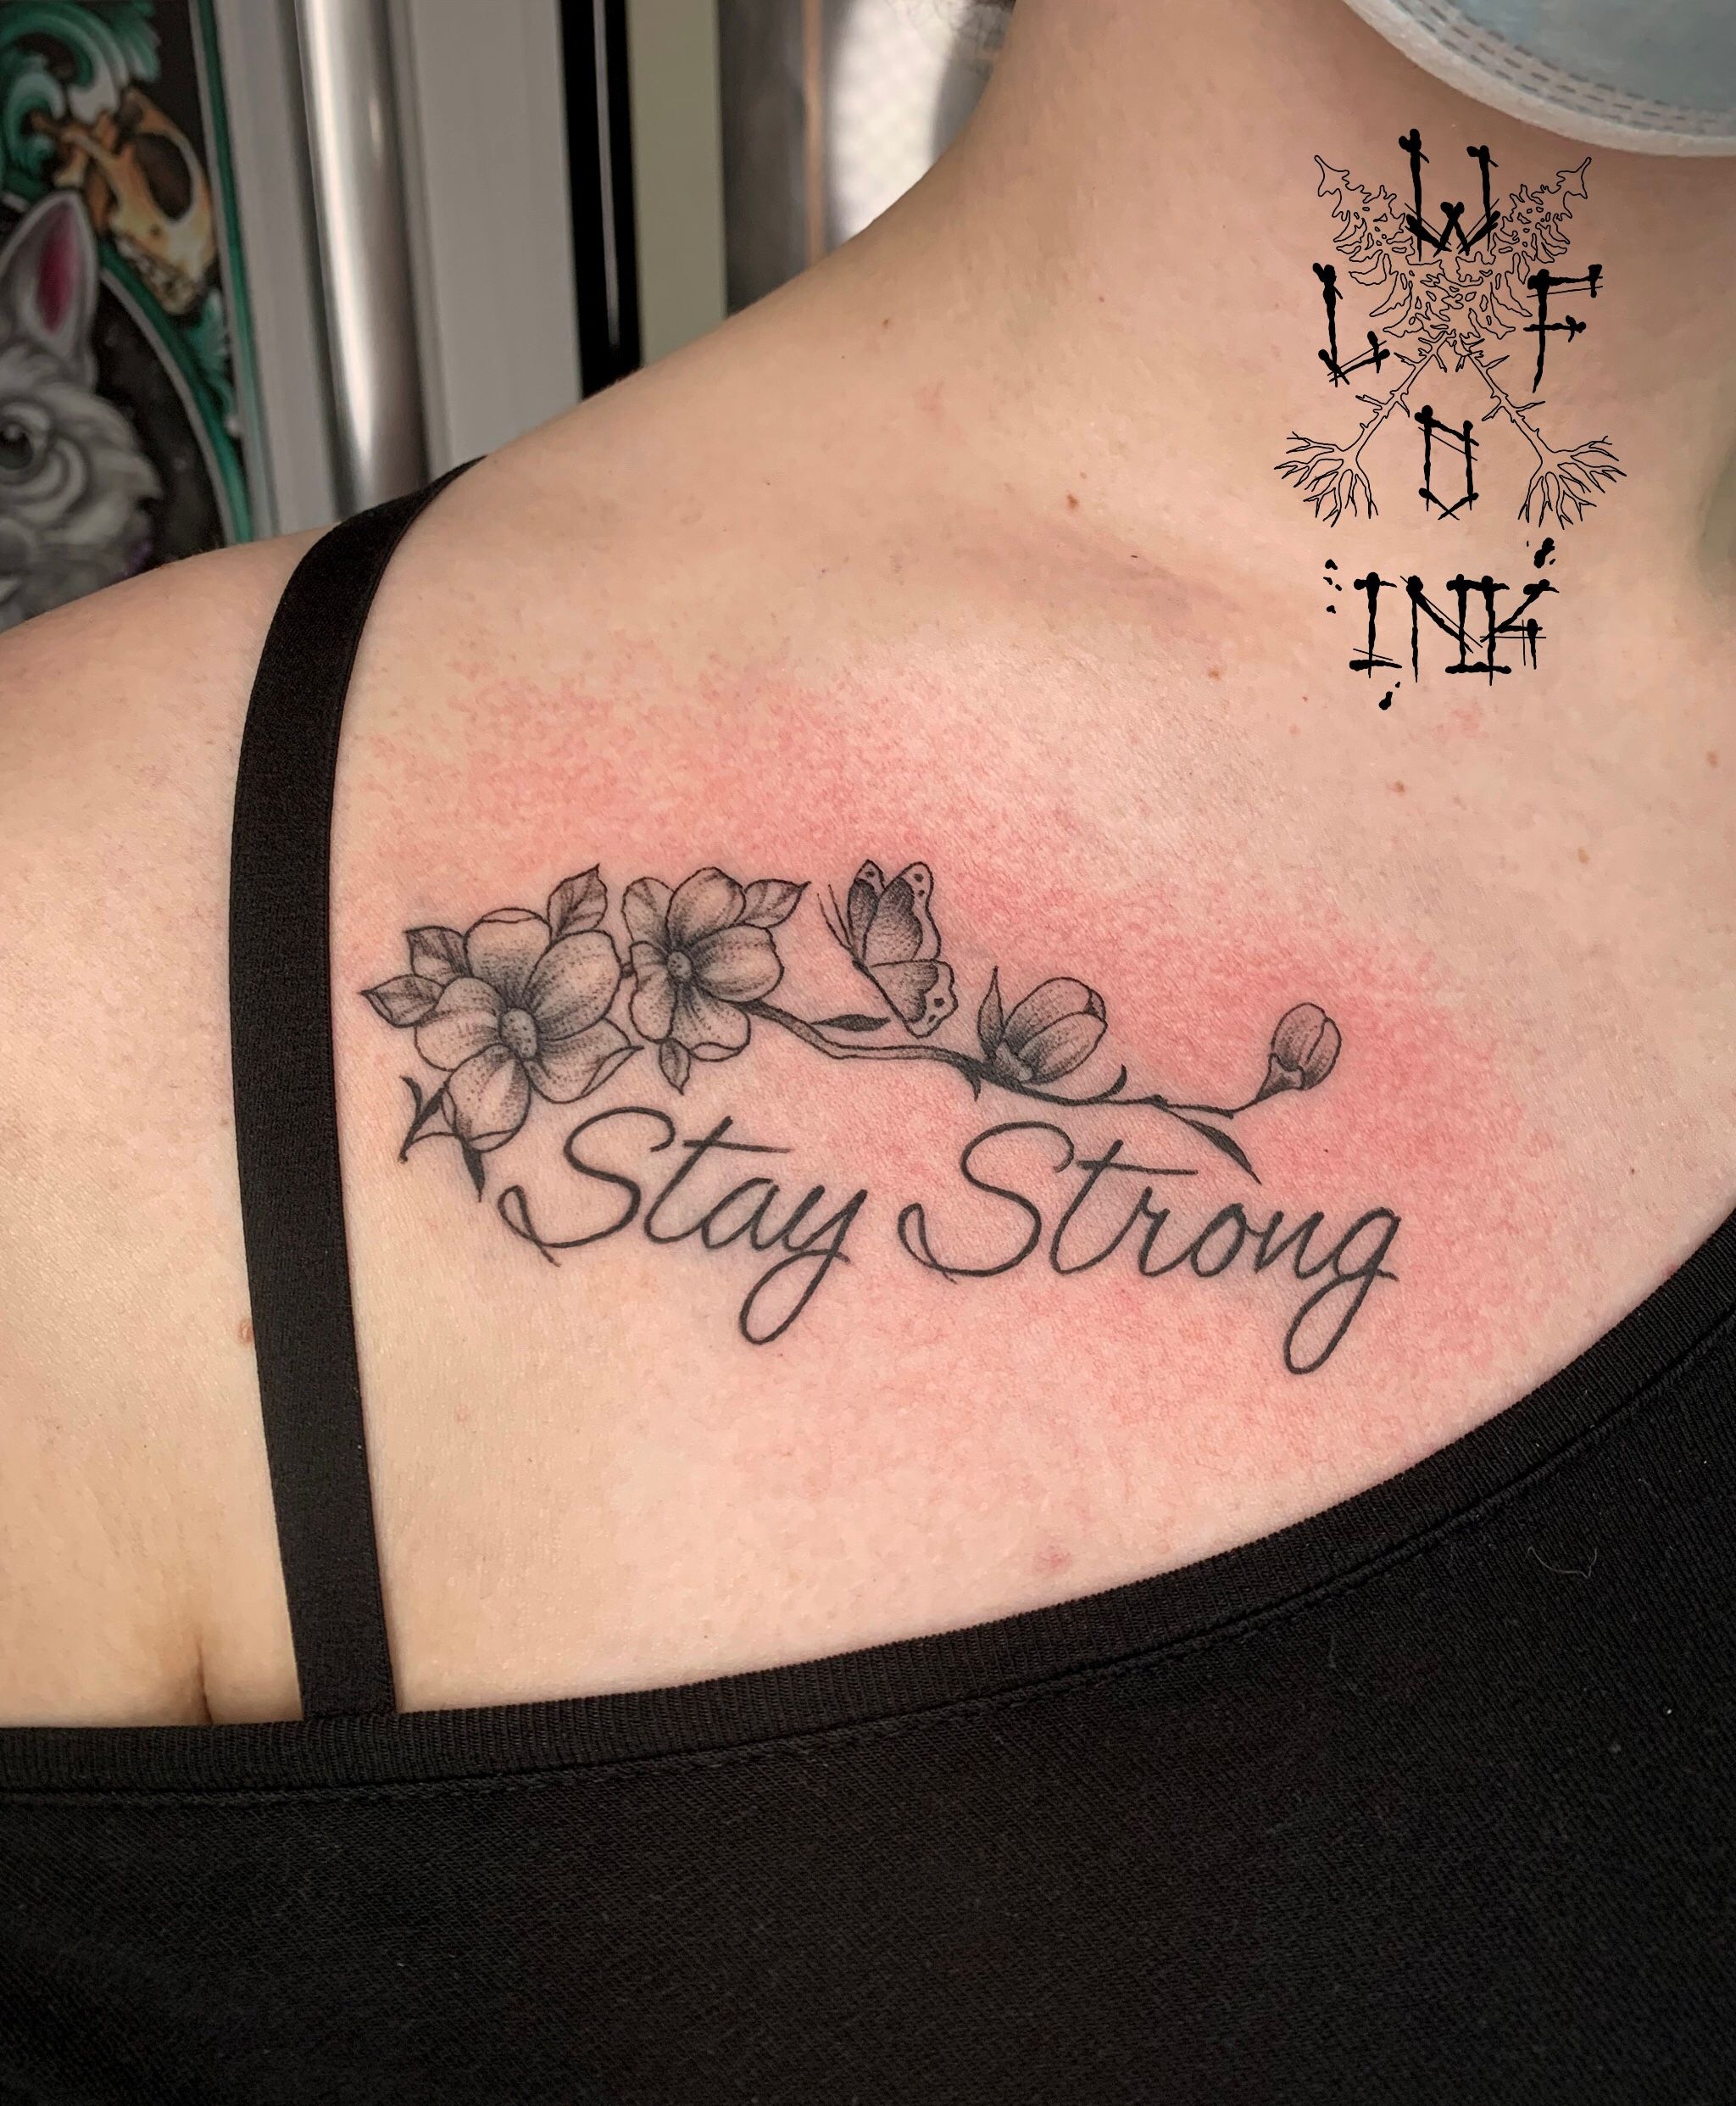 Buy 2 Stay Strong Temporary Tattoos Smashtat Online in India  Etsy